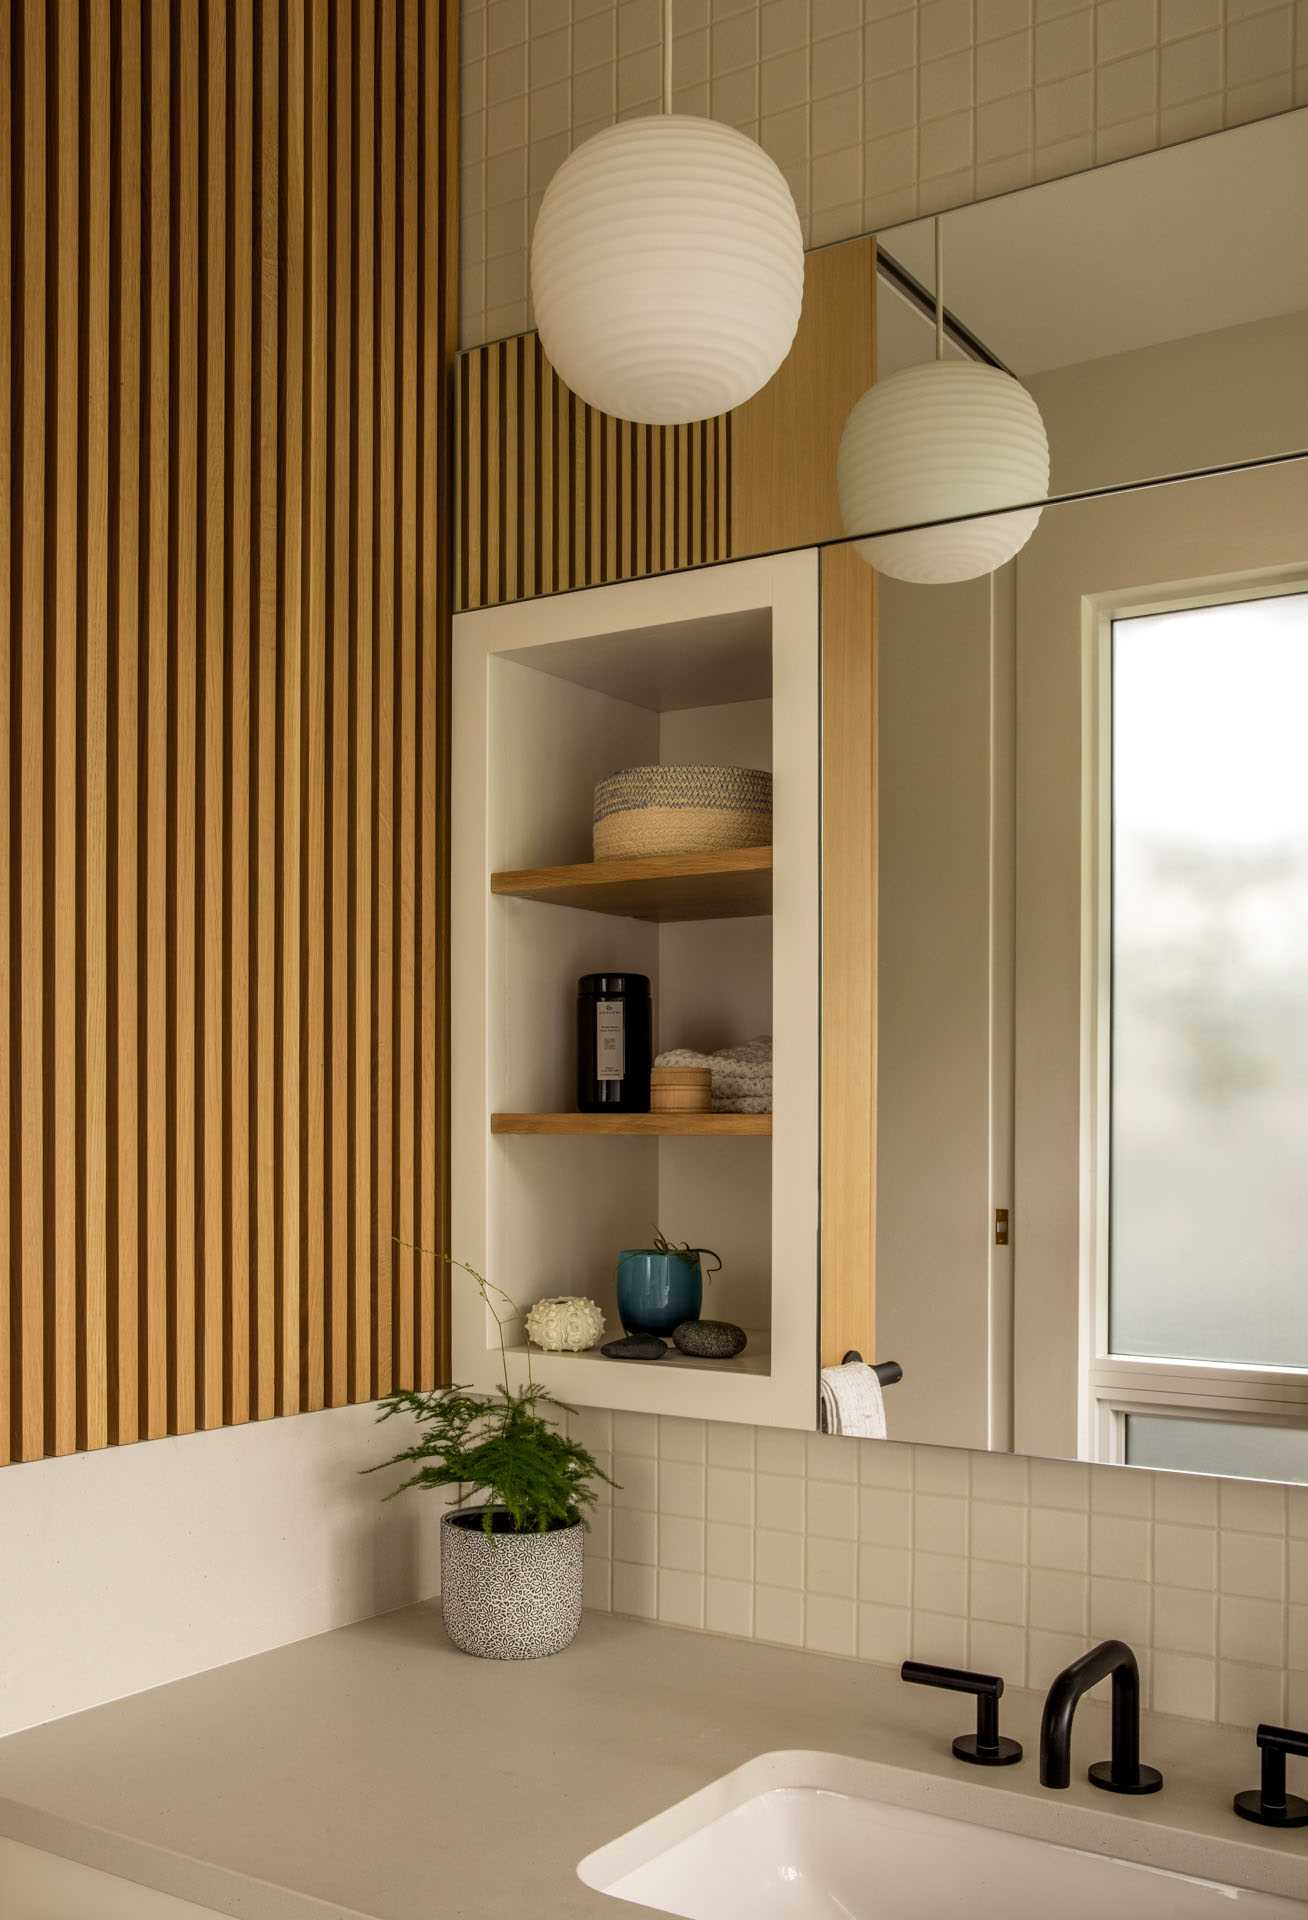 A modern family bathroom includes a traditional Japanese soaking tub (Ofuro), directly connecting to the outdoors via a folding glass door. A separate toilet room increases comfort and usability for the young family.